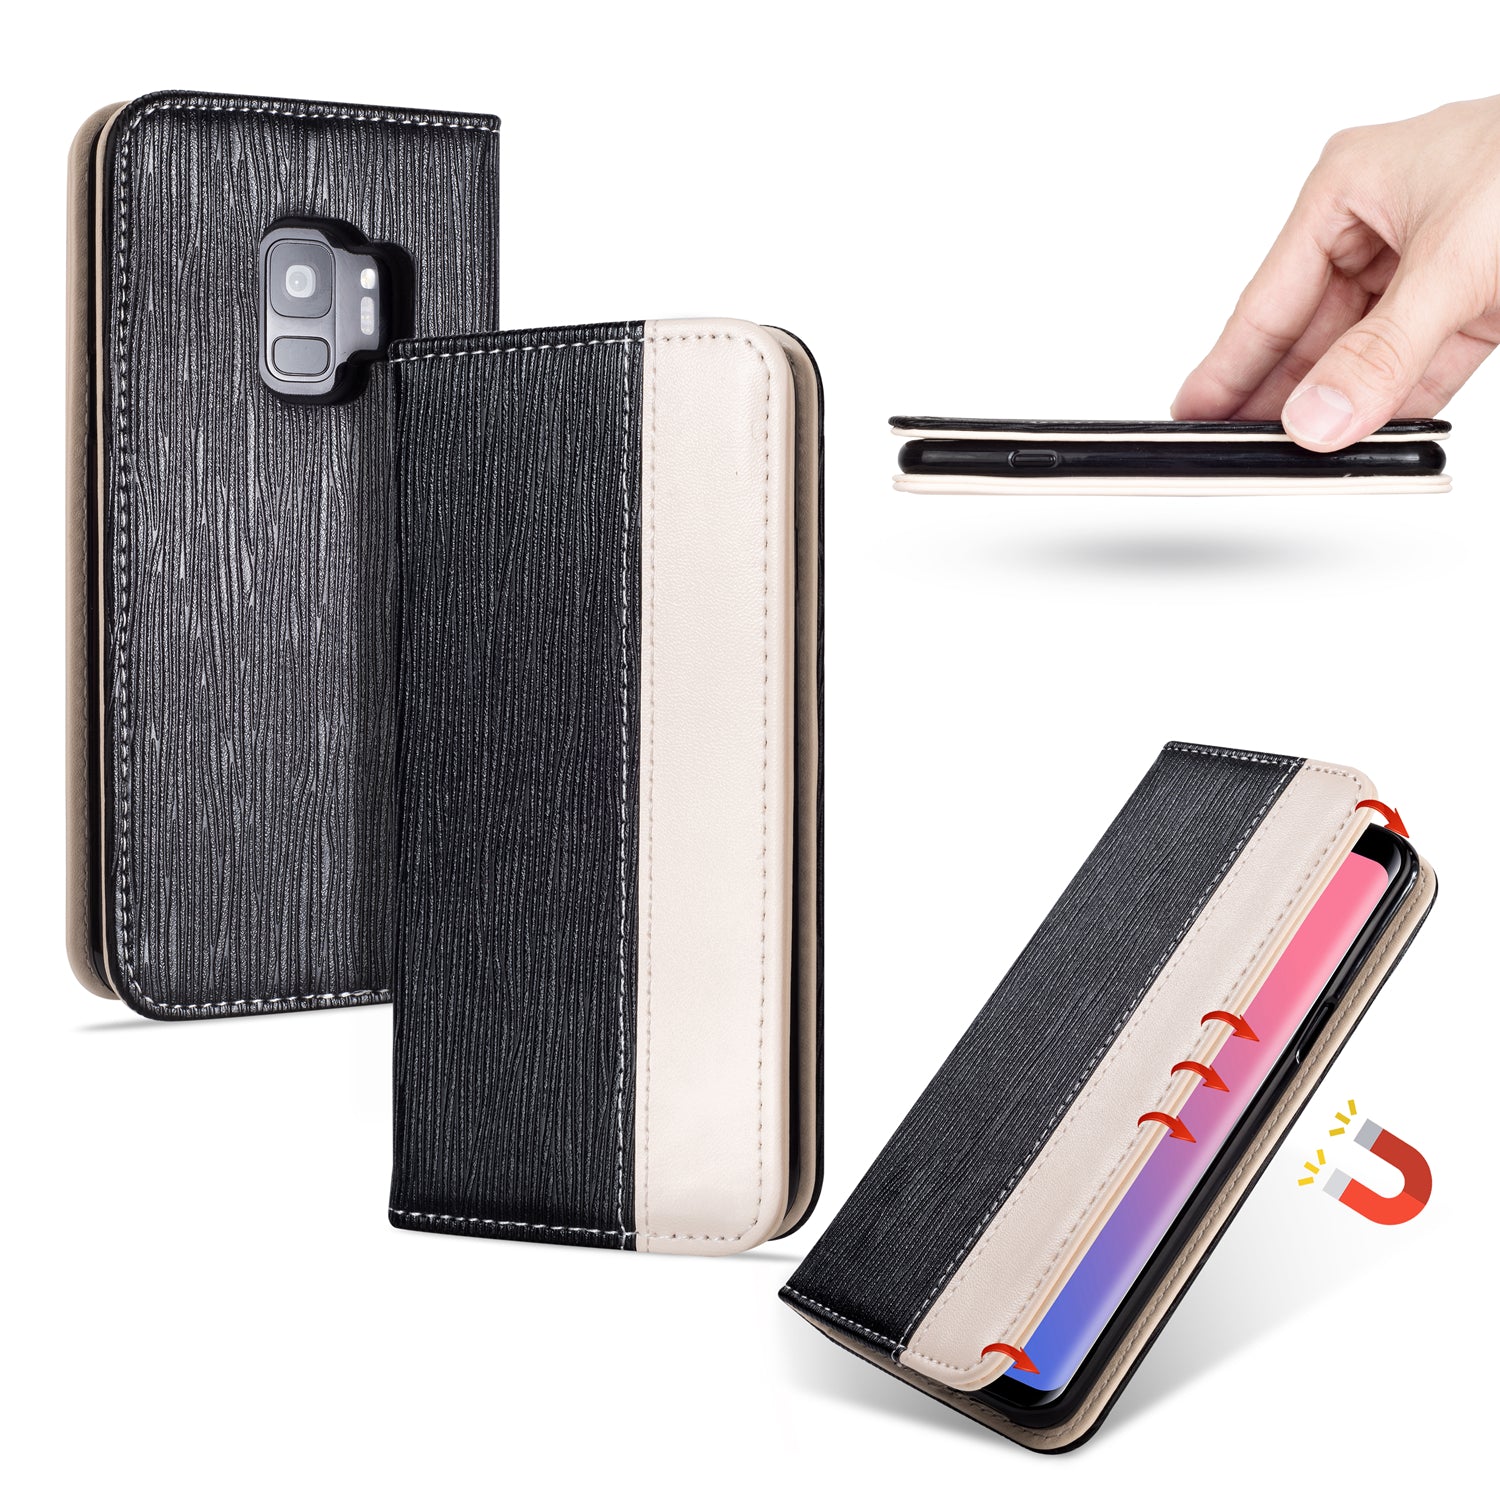 Bakeey Premium Magnetic Flip Card Slot Kickstand Protective Case For Samsung Galaxy S9